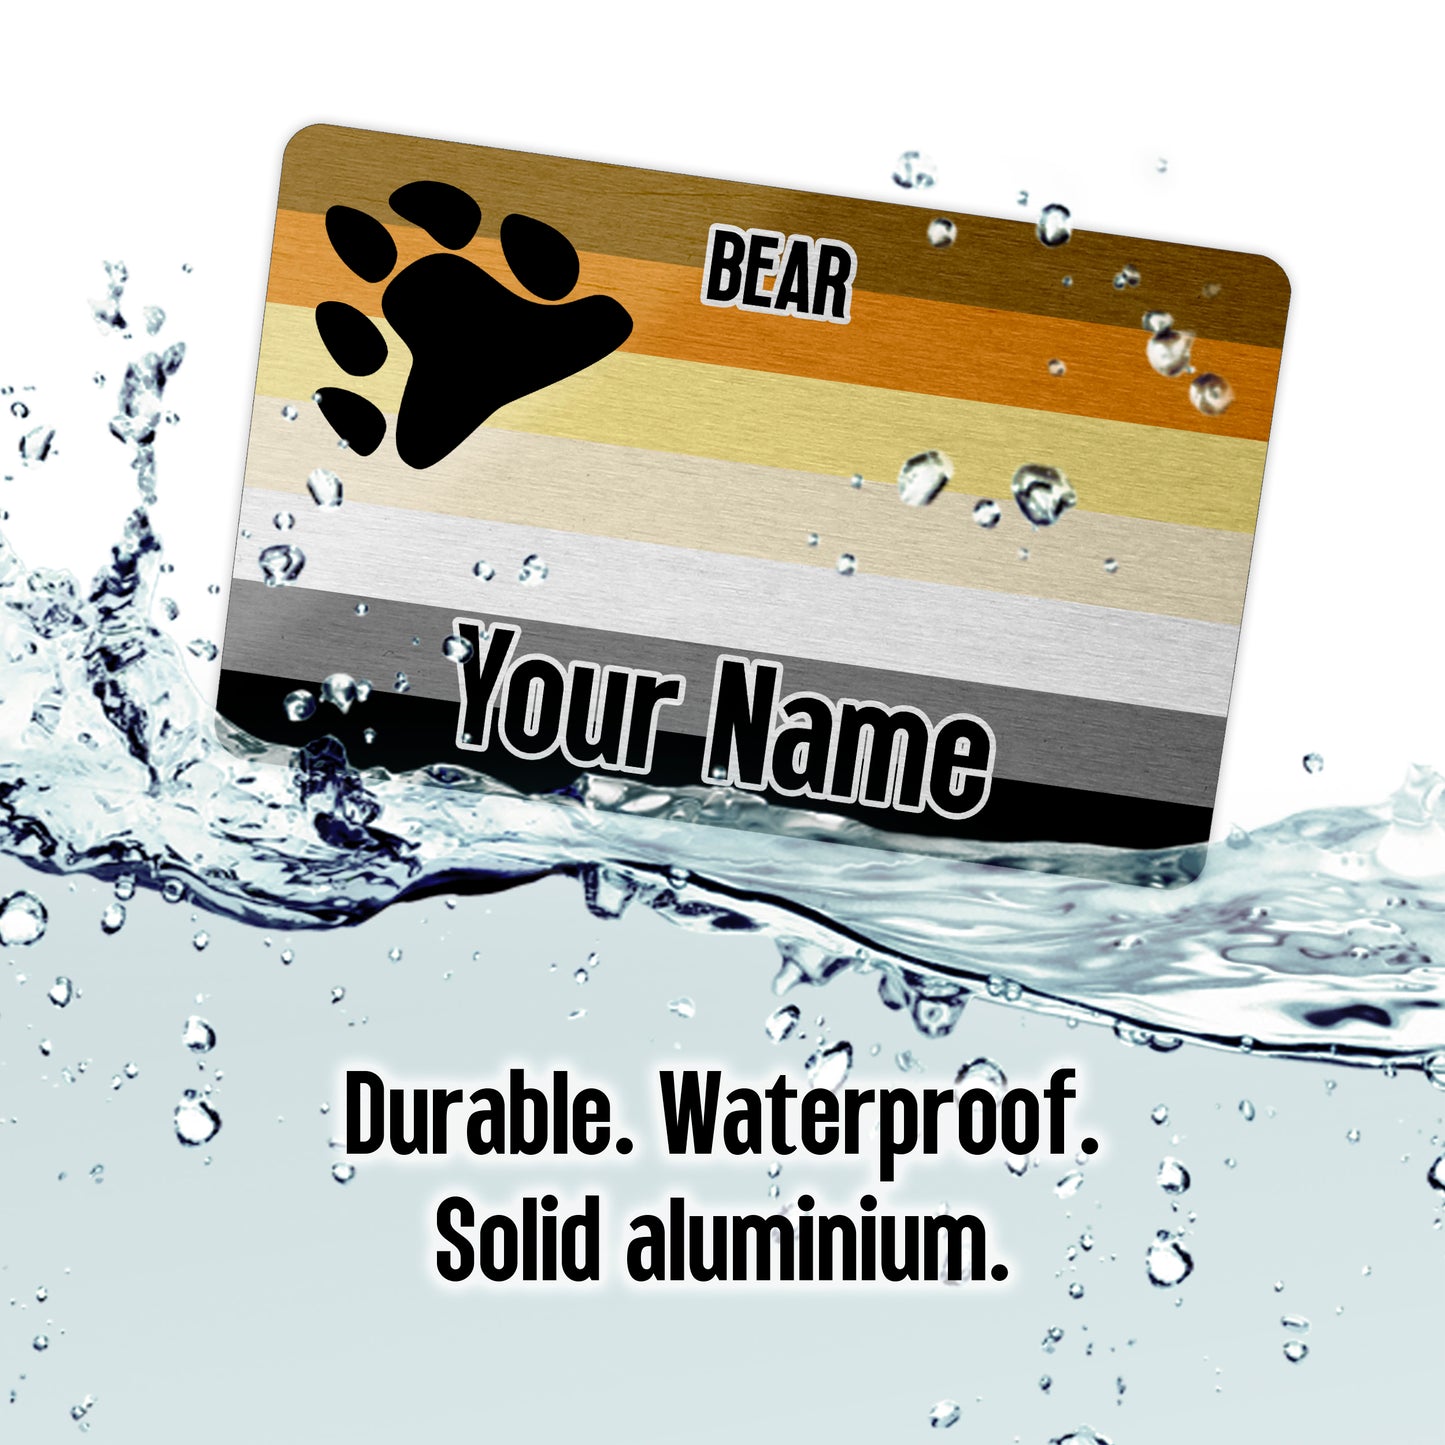 Aluminium wallet card personalised with your name and the bear pride flag